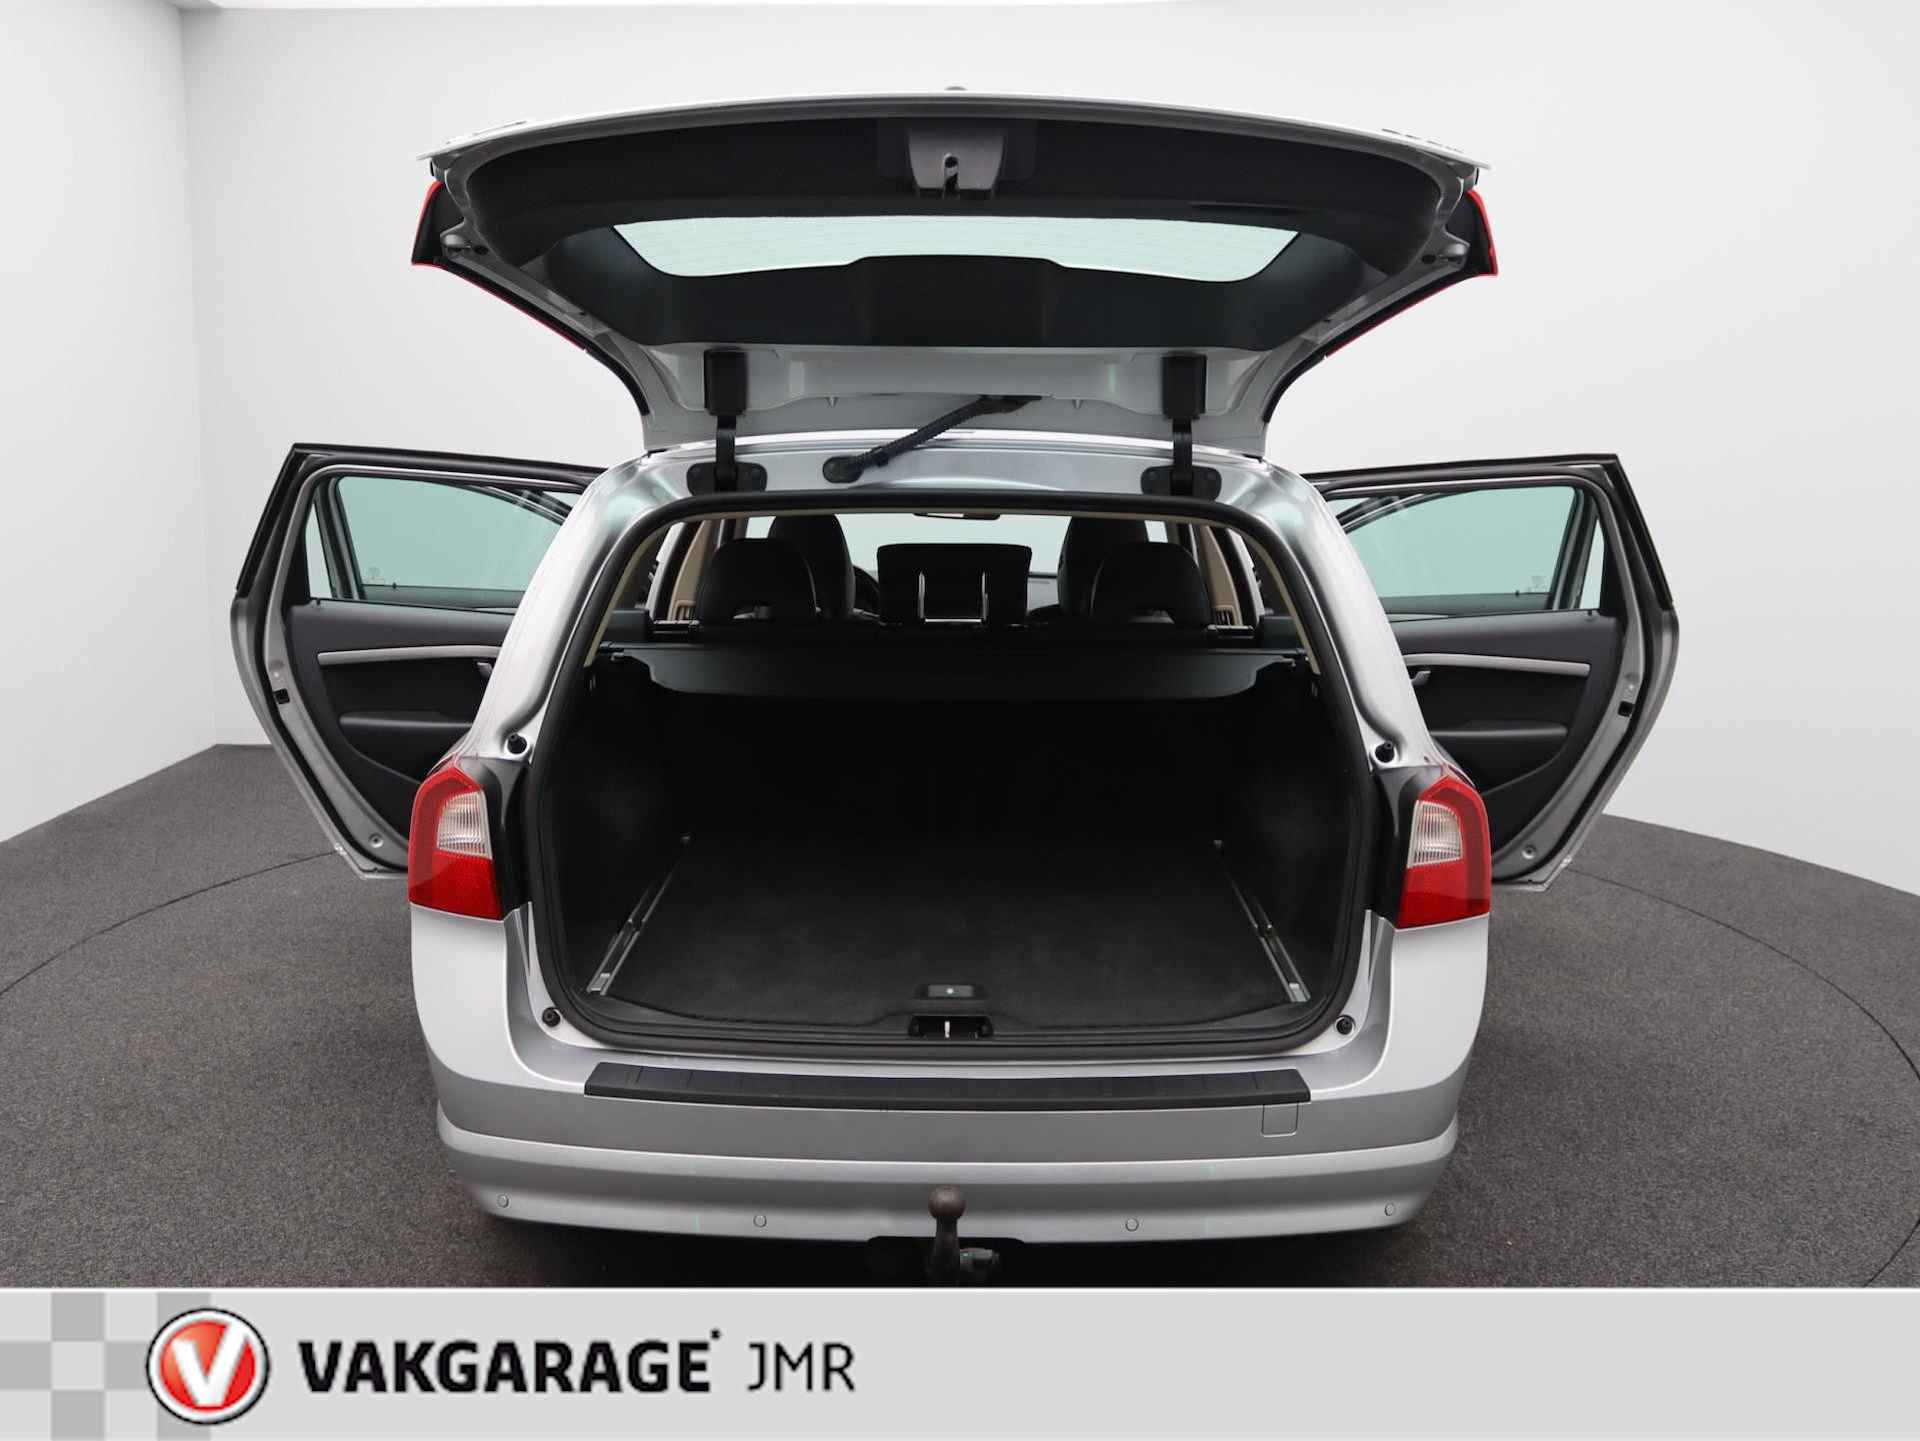 Volvo V70 2.5FT Momentum Youngtimer Trekhaak - PDC Achter - Stoel + Achterbank verwarming - Bluetooth - Climate en Cruise Control - 33/39